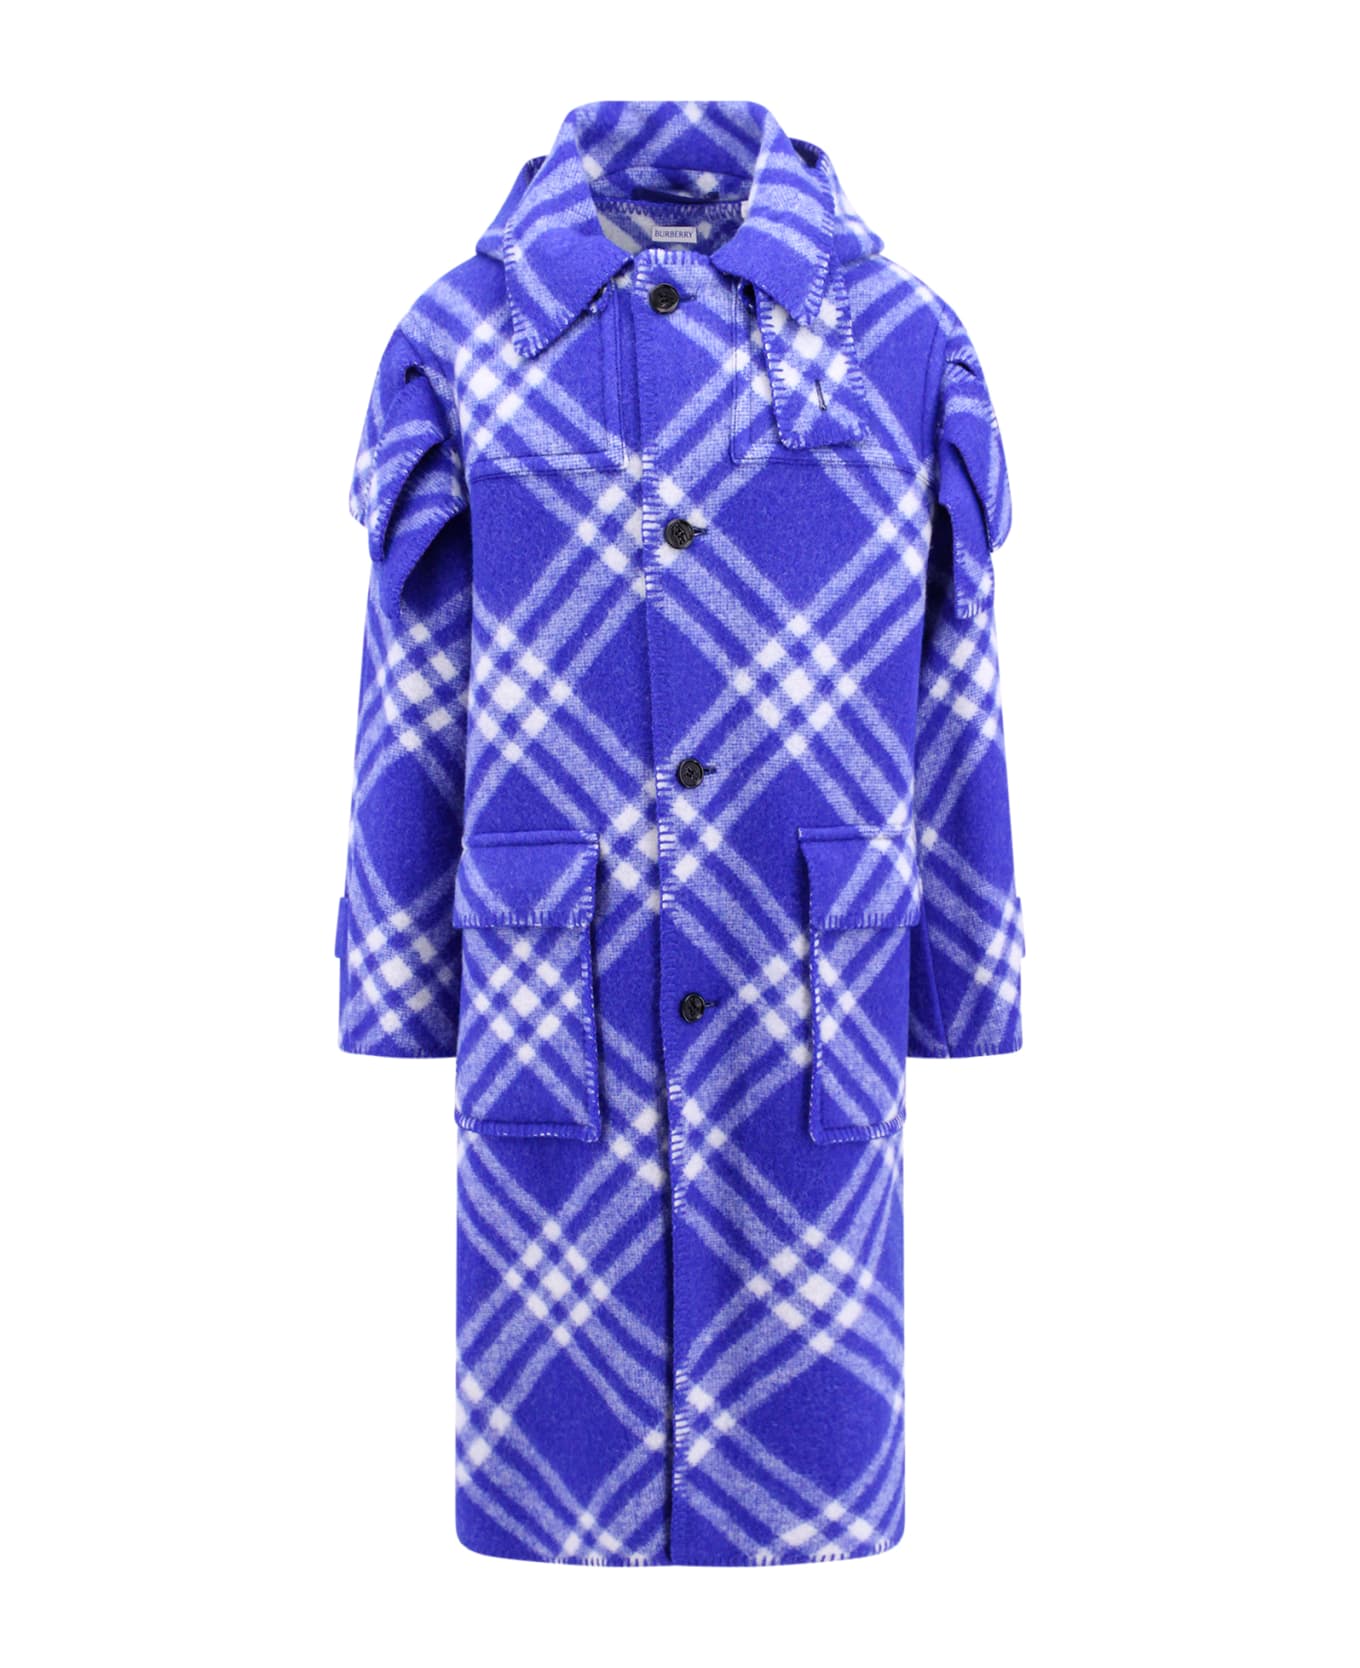 Burberry Check Long Buttoned Coat - Blue